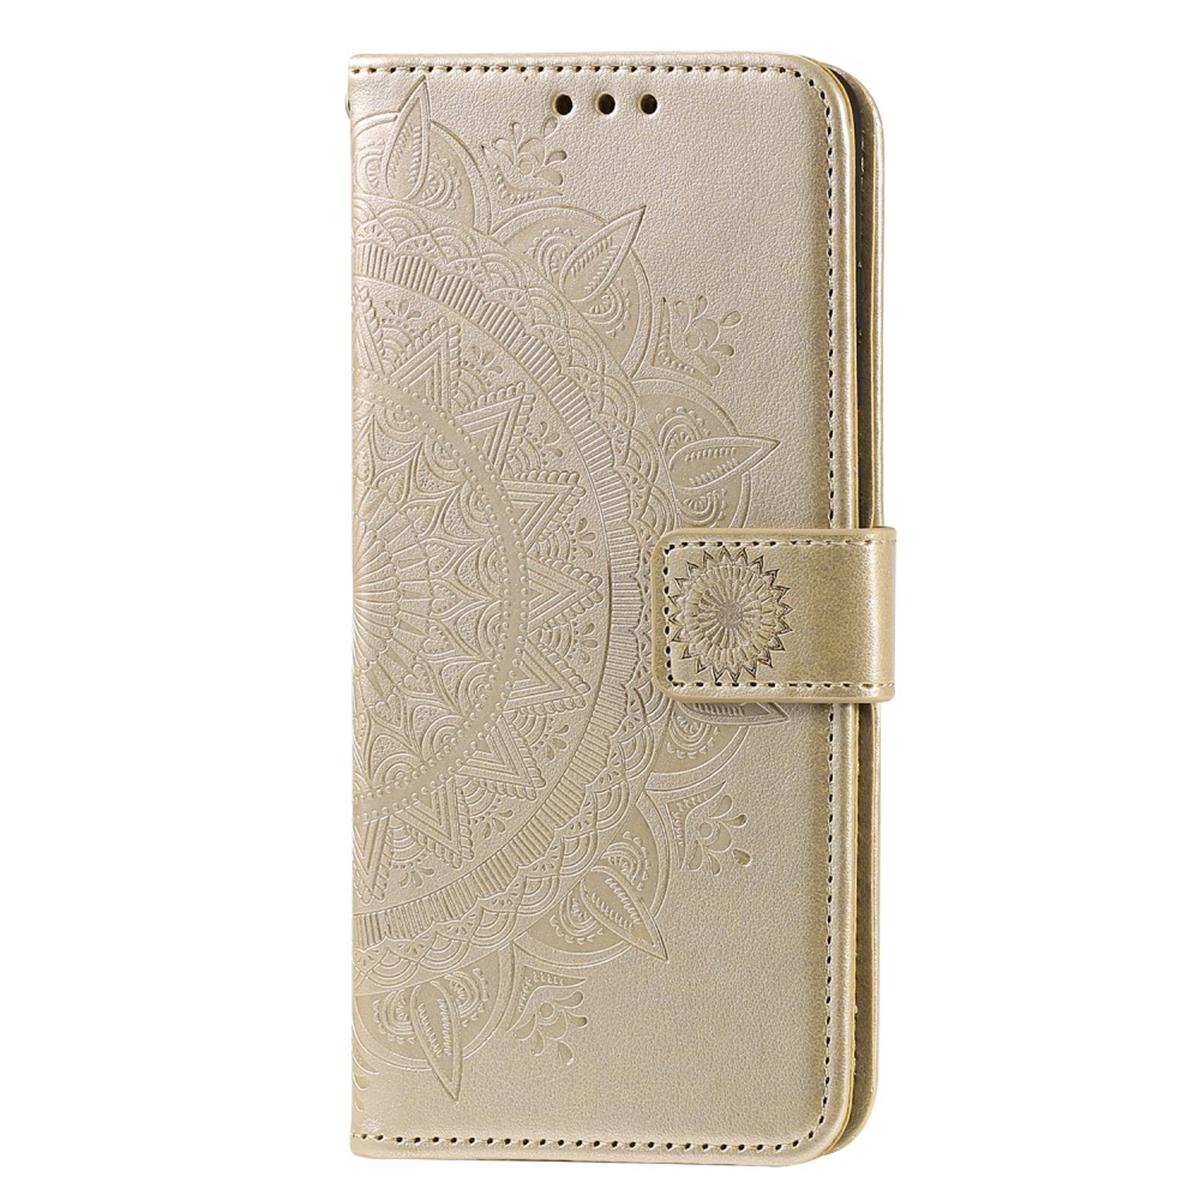 Muster, 2020, P Mandala Huawei, Klapphülle Smart COVERKINGZ Gold mit Bookcover,